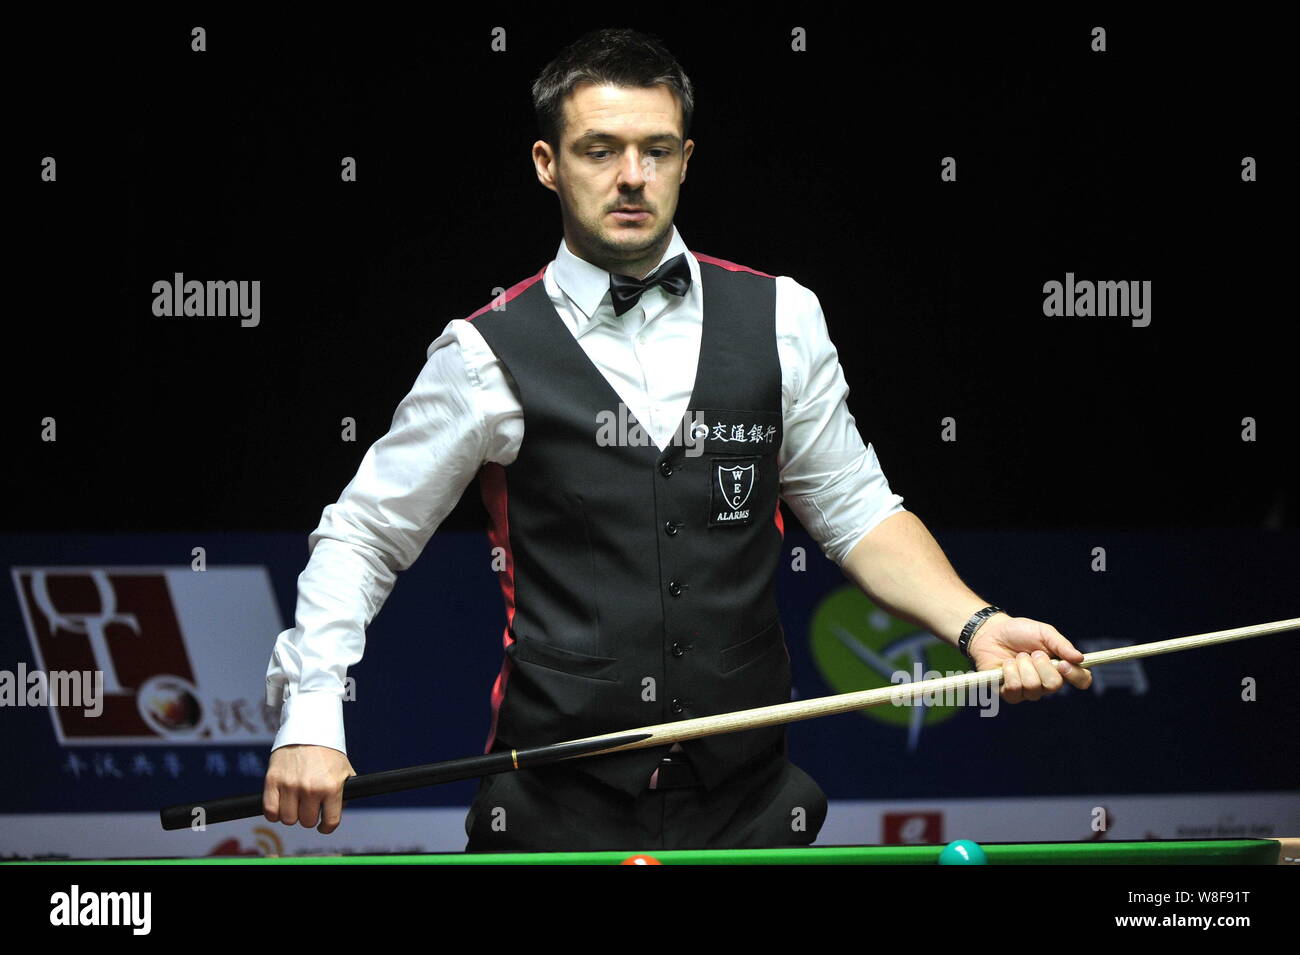 Michael Holt of England considers a shot against Stephen Maguire of England during their first round match of the 2015 World Snooker Shanghai Masters Stock Photo